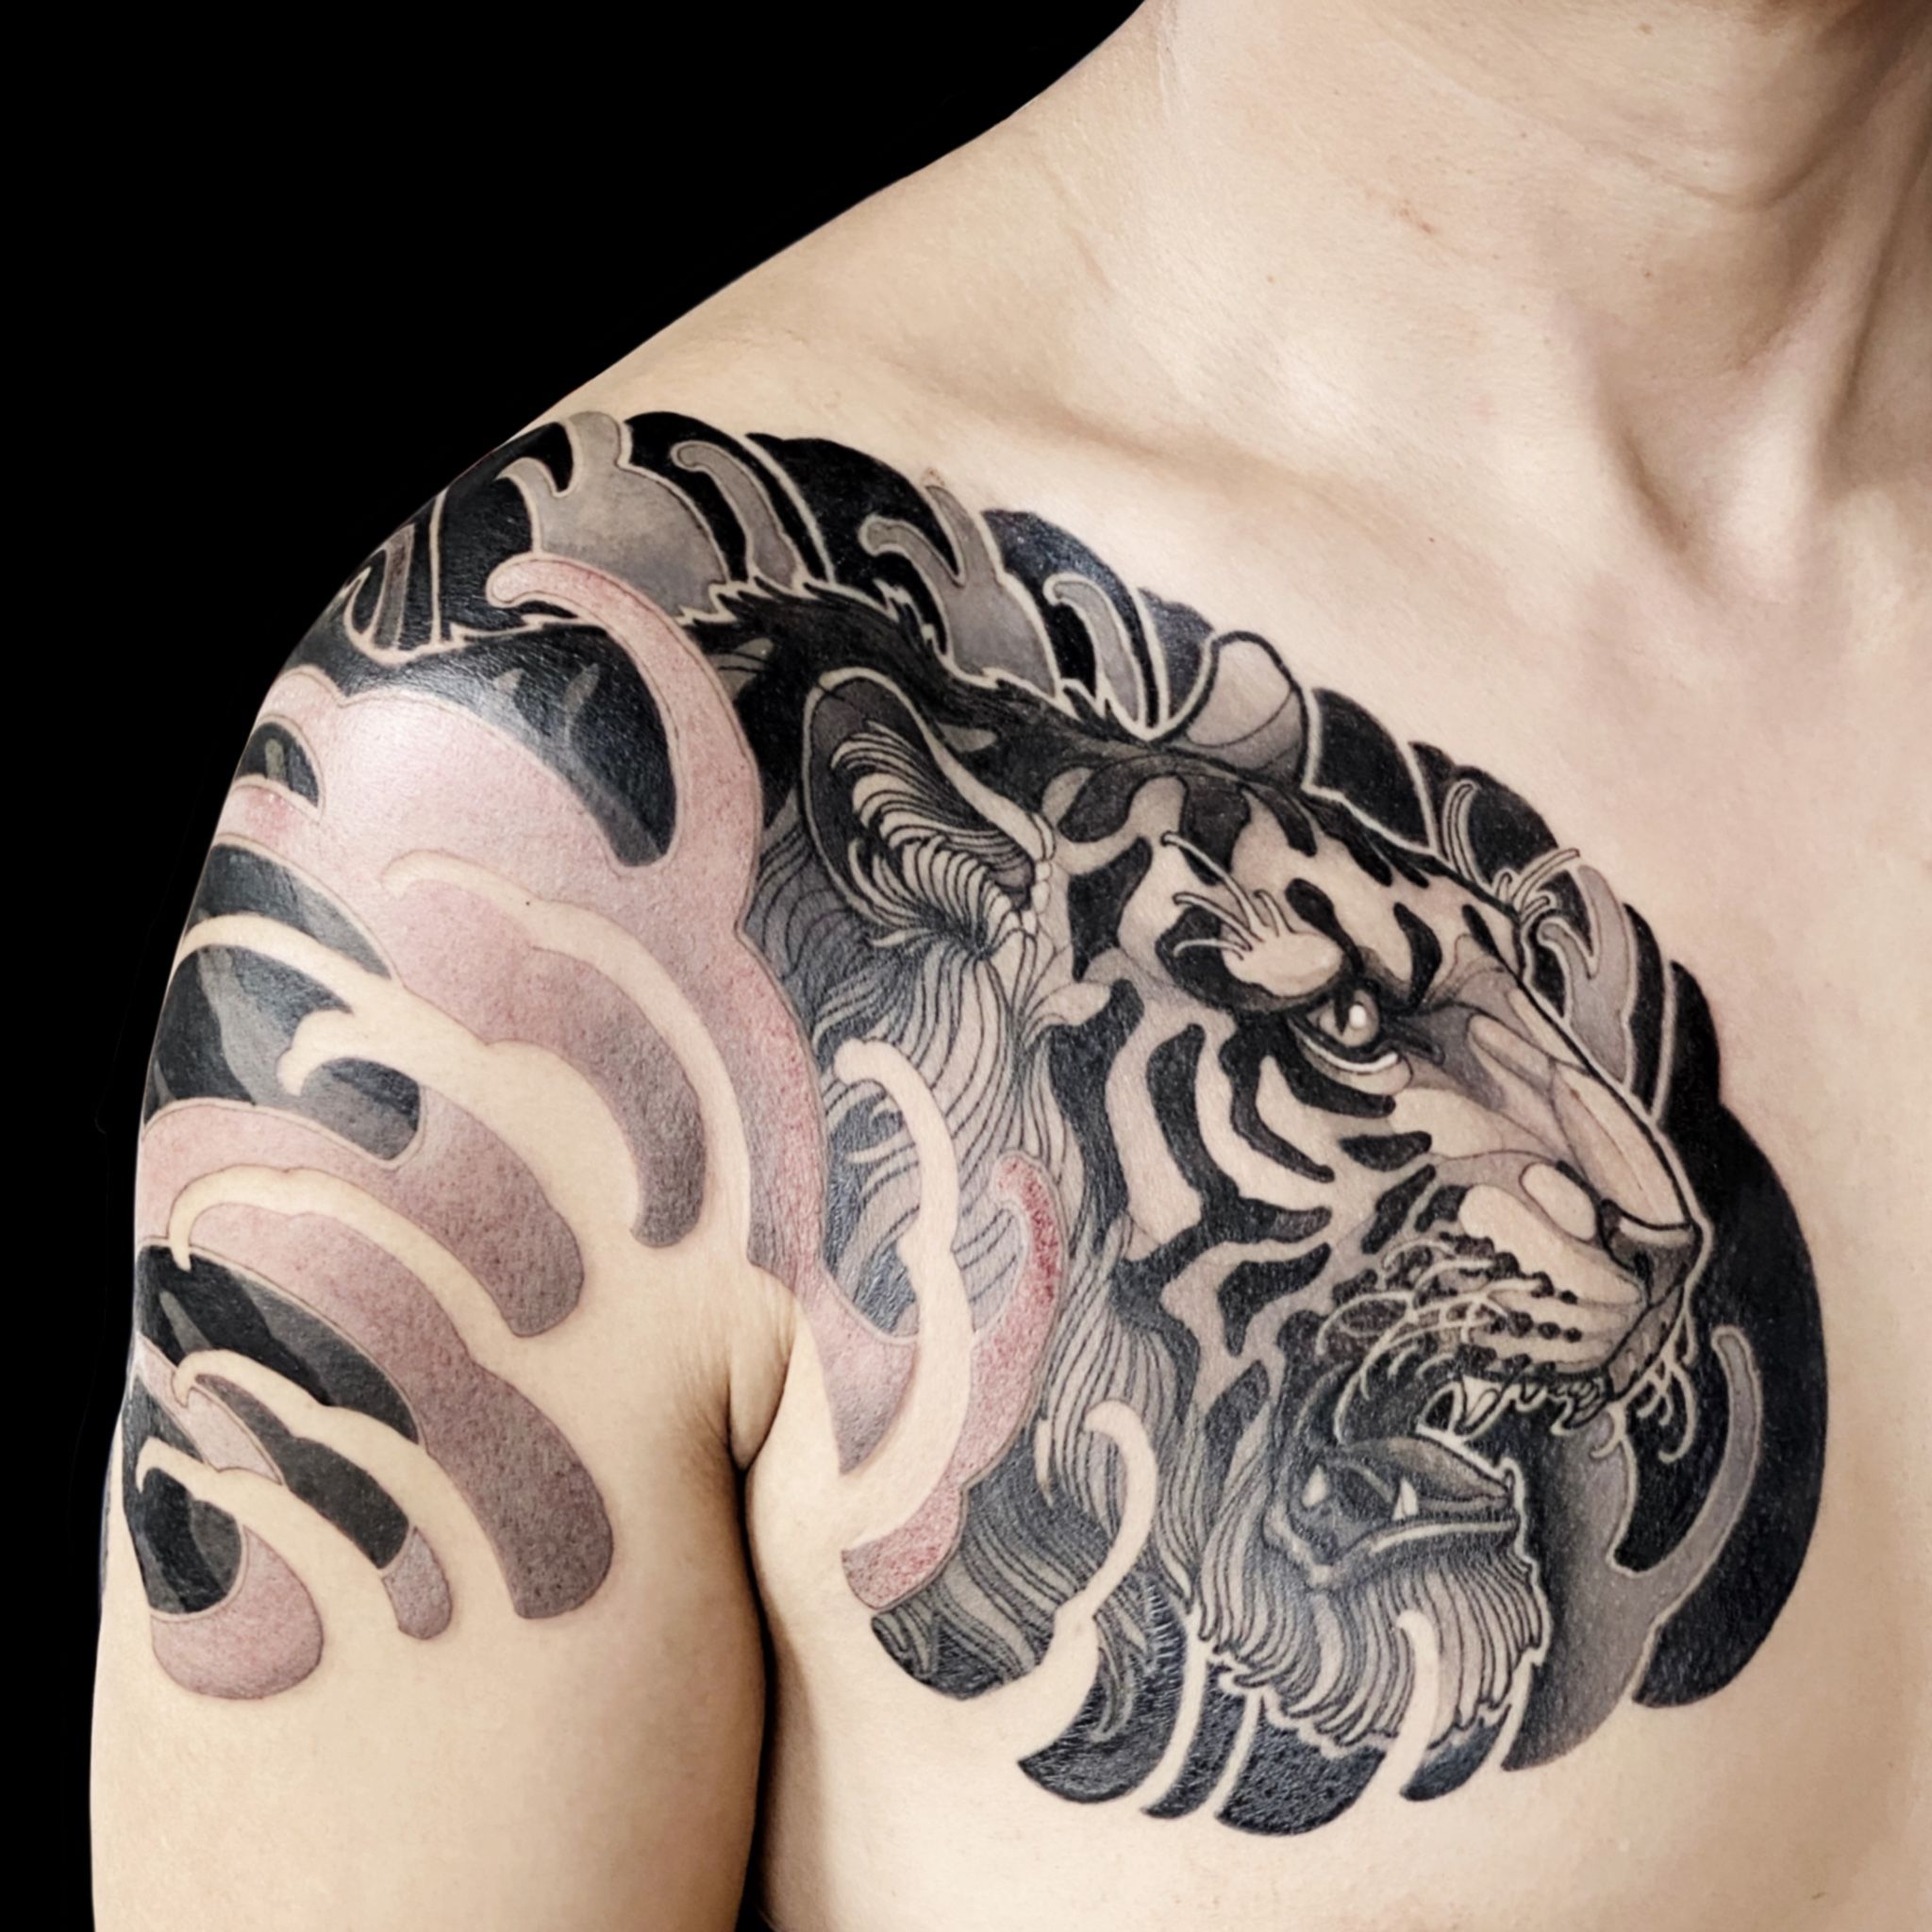 Tattoo uploaded by Daze Lee  Tiger chest to shoulder piece with Japanese  inspired ornamental finger waves  Tattoodo